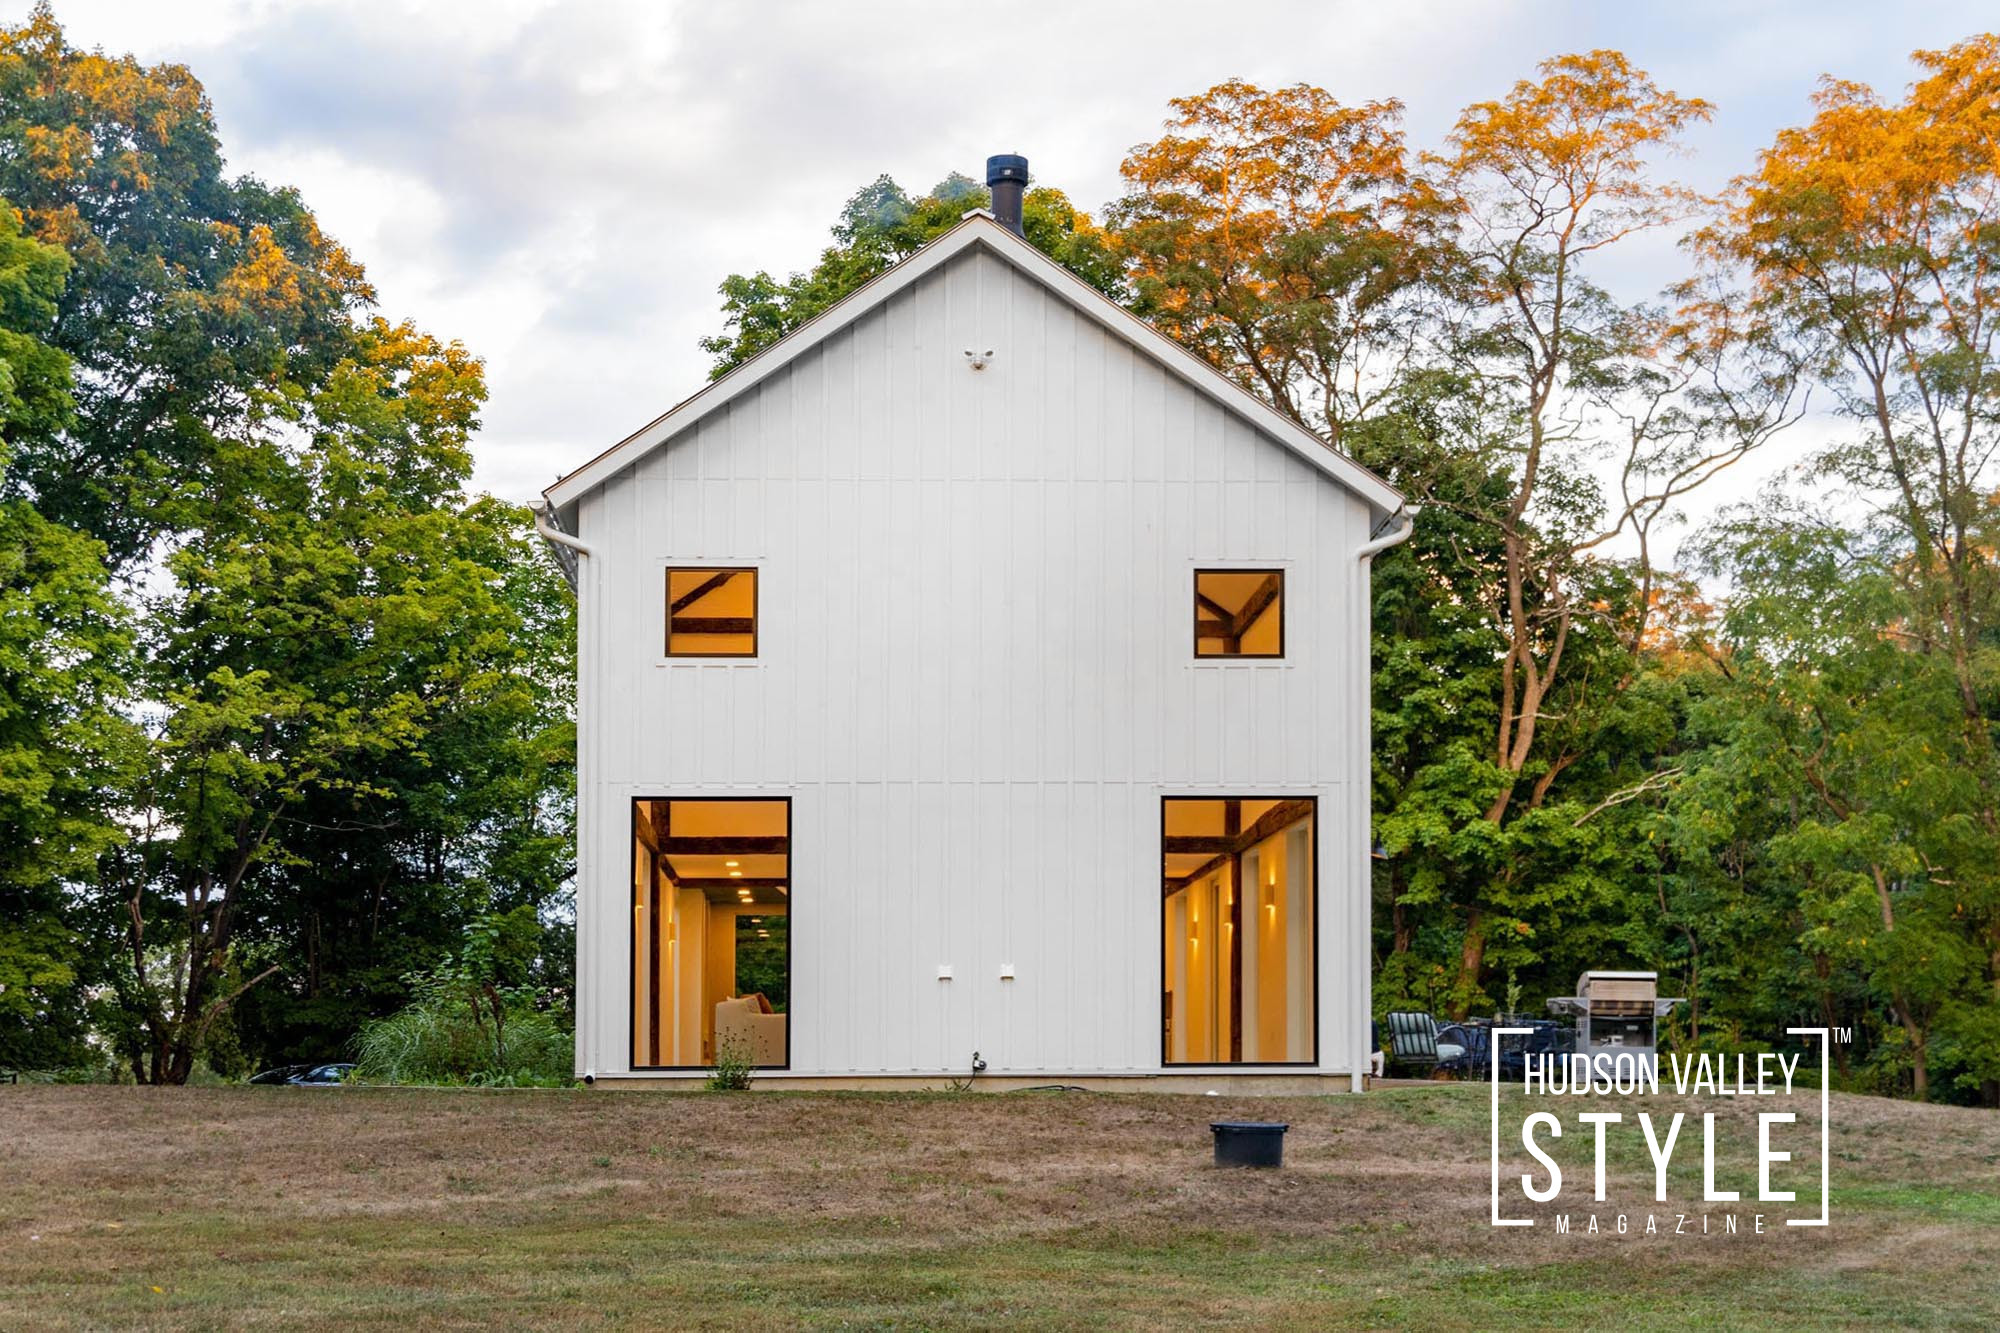 Airbnb Review of a Converted Barn Overlooking Apsley Hill Farm – Hudson Valley Airbnb Reviews with Photographer Maxwell Alexander